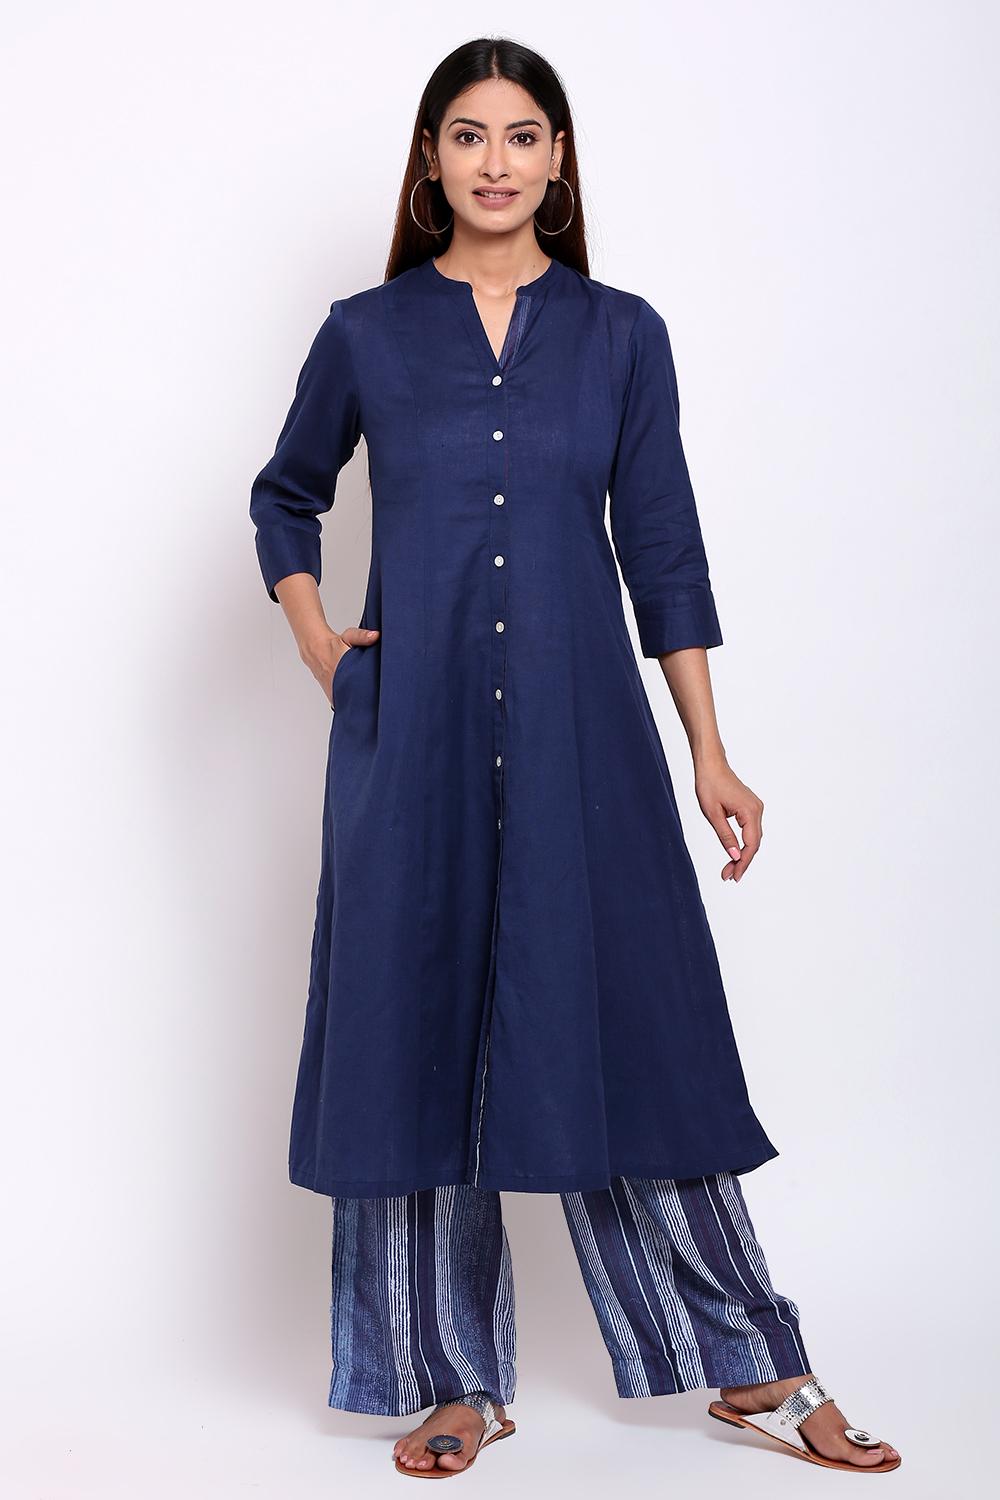 Buy Online Navy Blue Cotton Flax A Line Suit Set for Women & Girls at ...